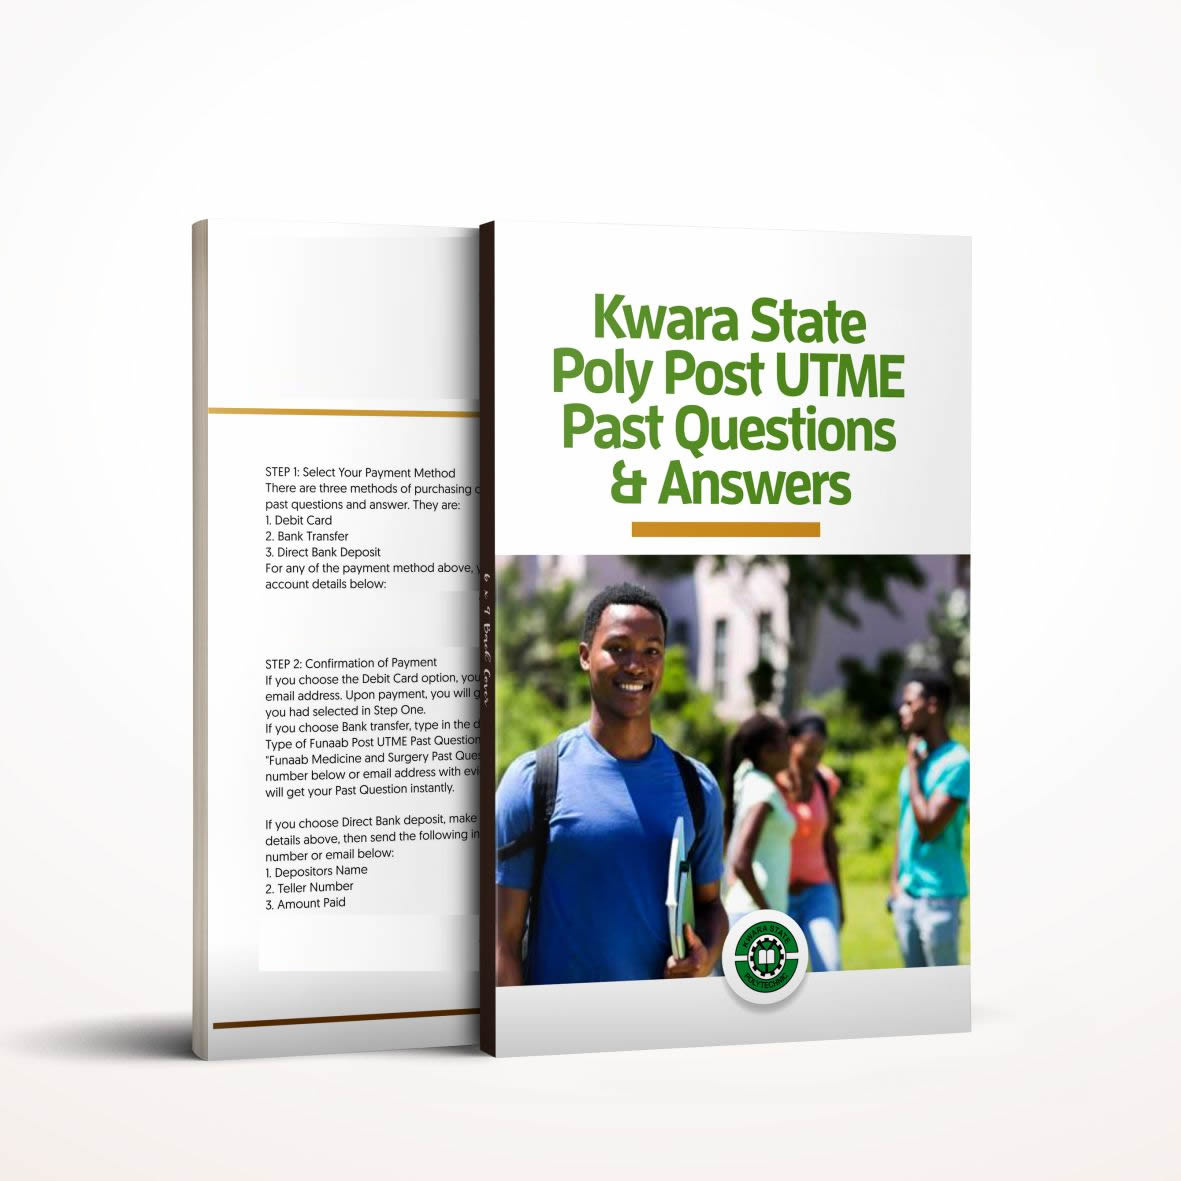 KWAS POLY Post UTME past questions and answers